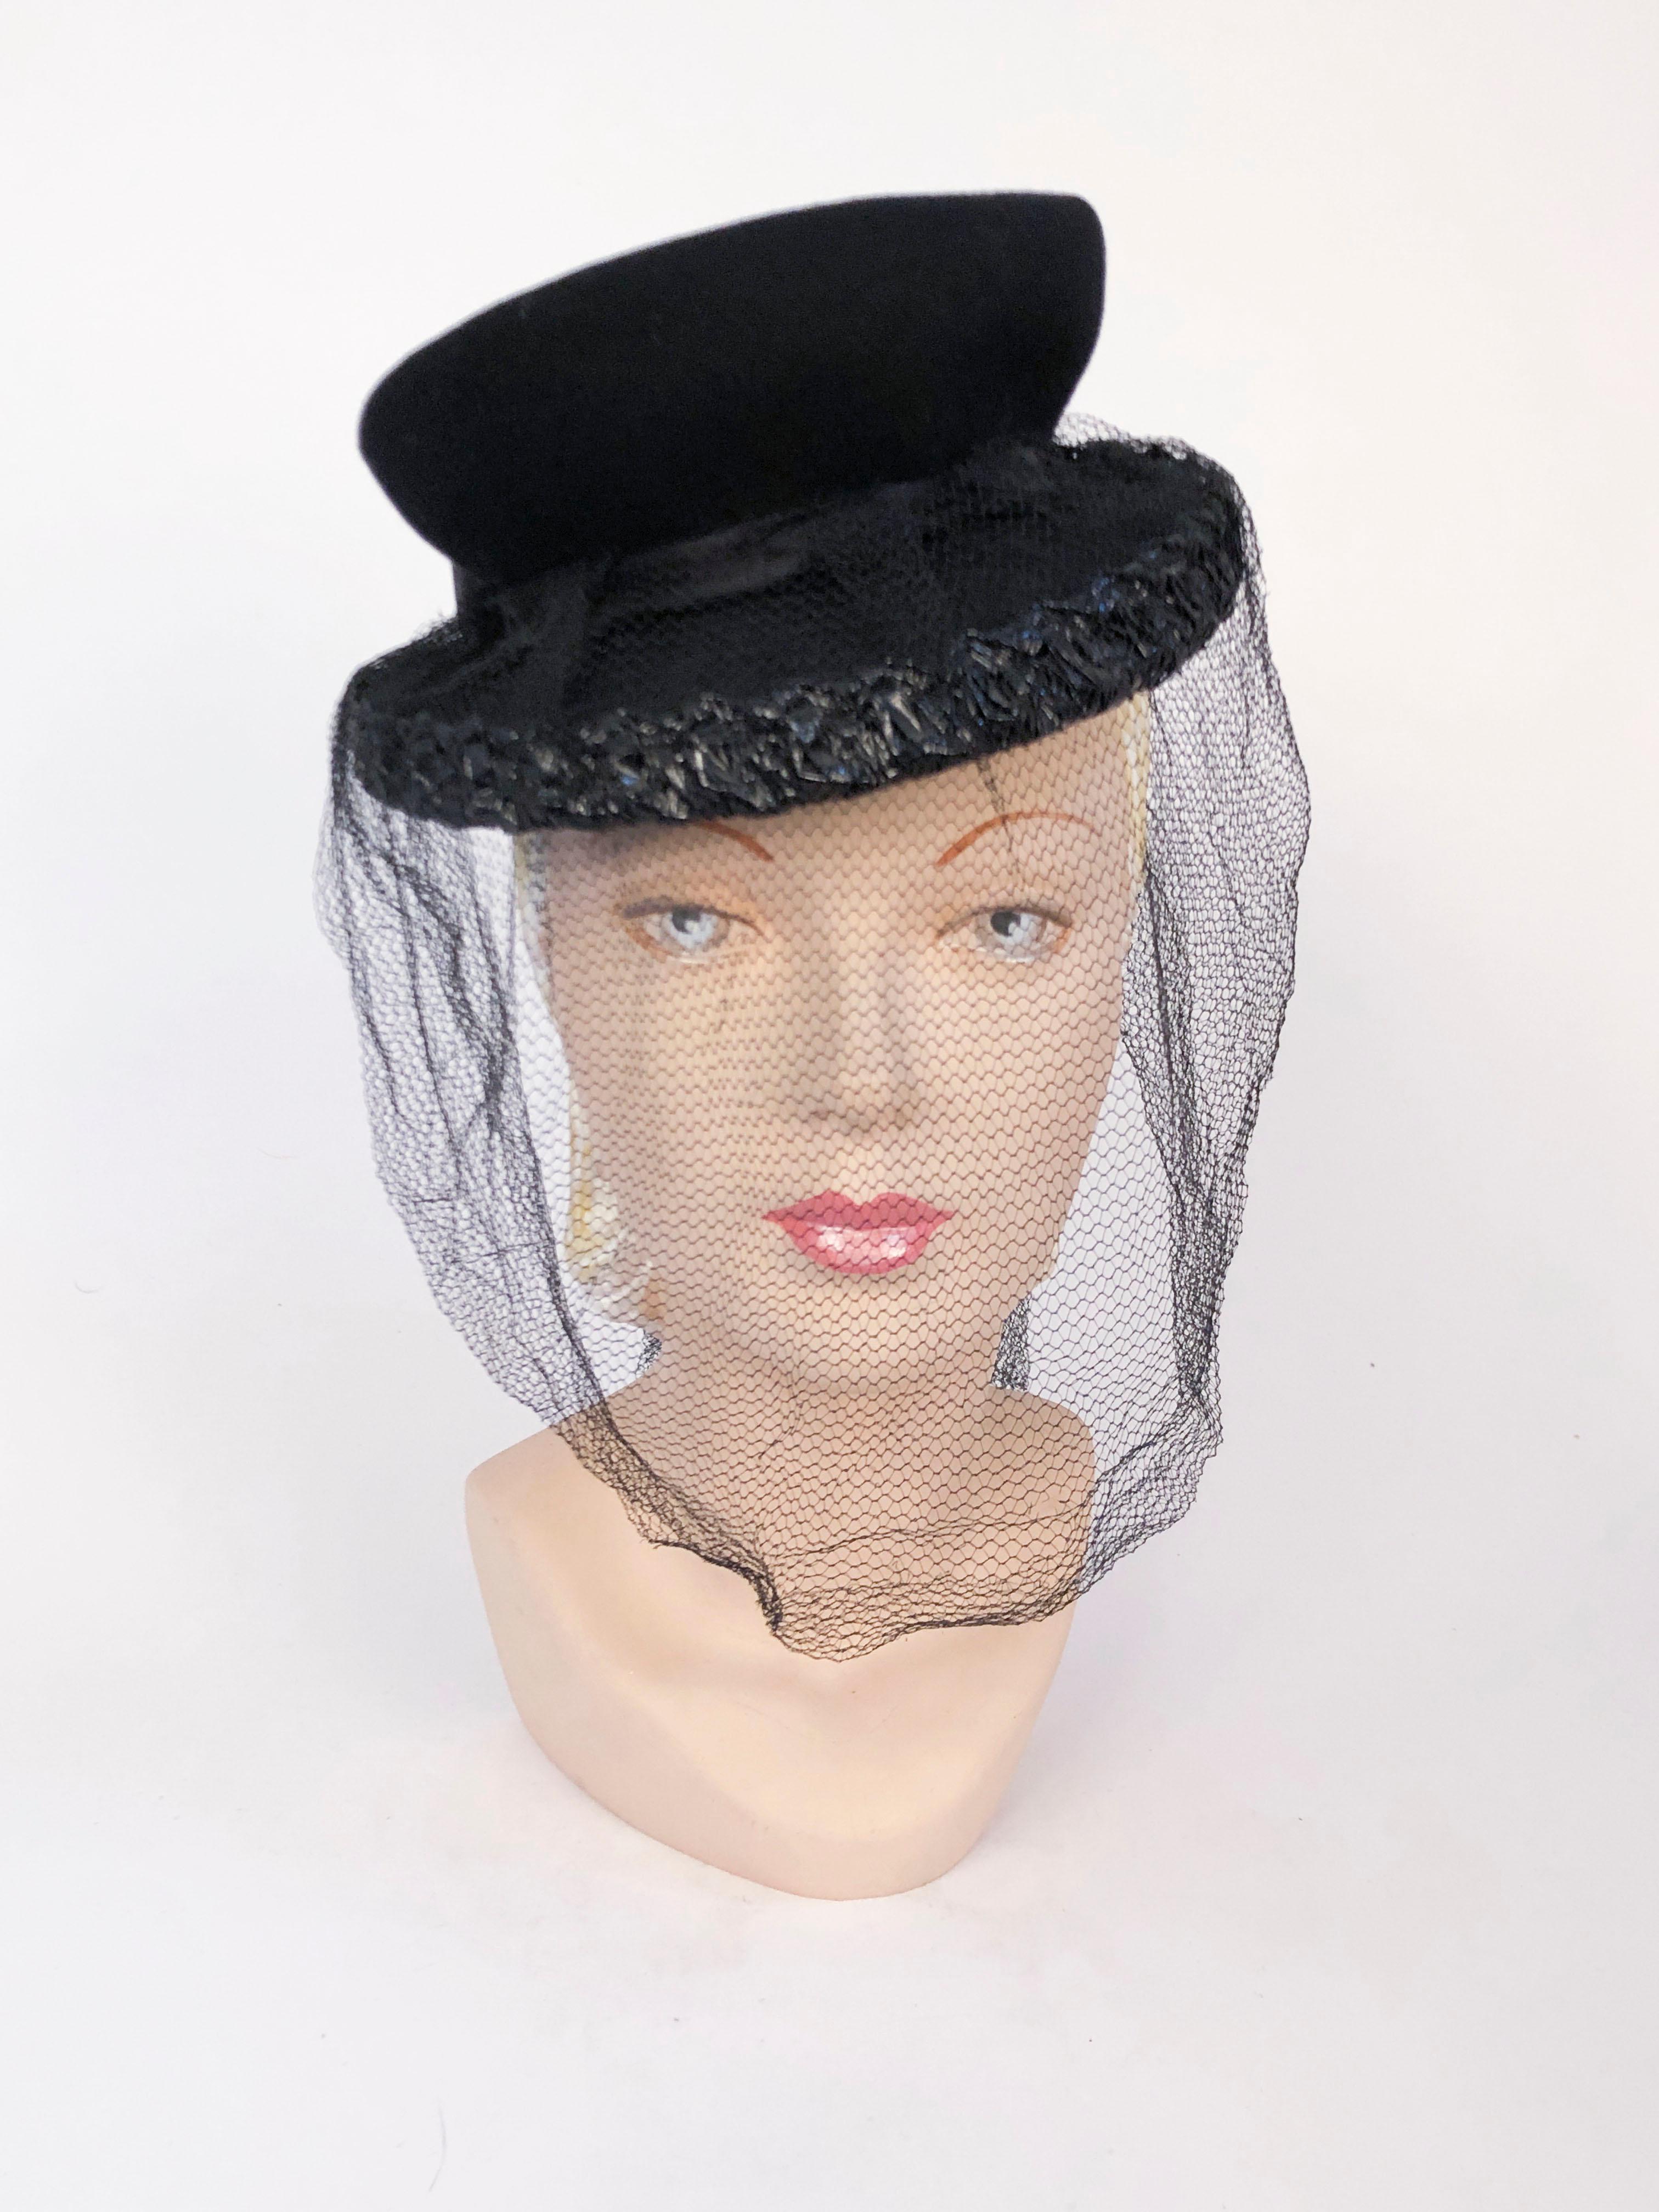 Late 1930's, early 1940s Black hand-sculpted wool perch hat trimmed in black shiny raffia and features a black silk satin band and oversized bow on the back. The veil is full-face coverage and has two tails that accent the satin bow.